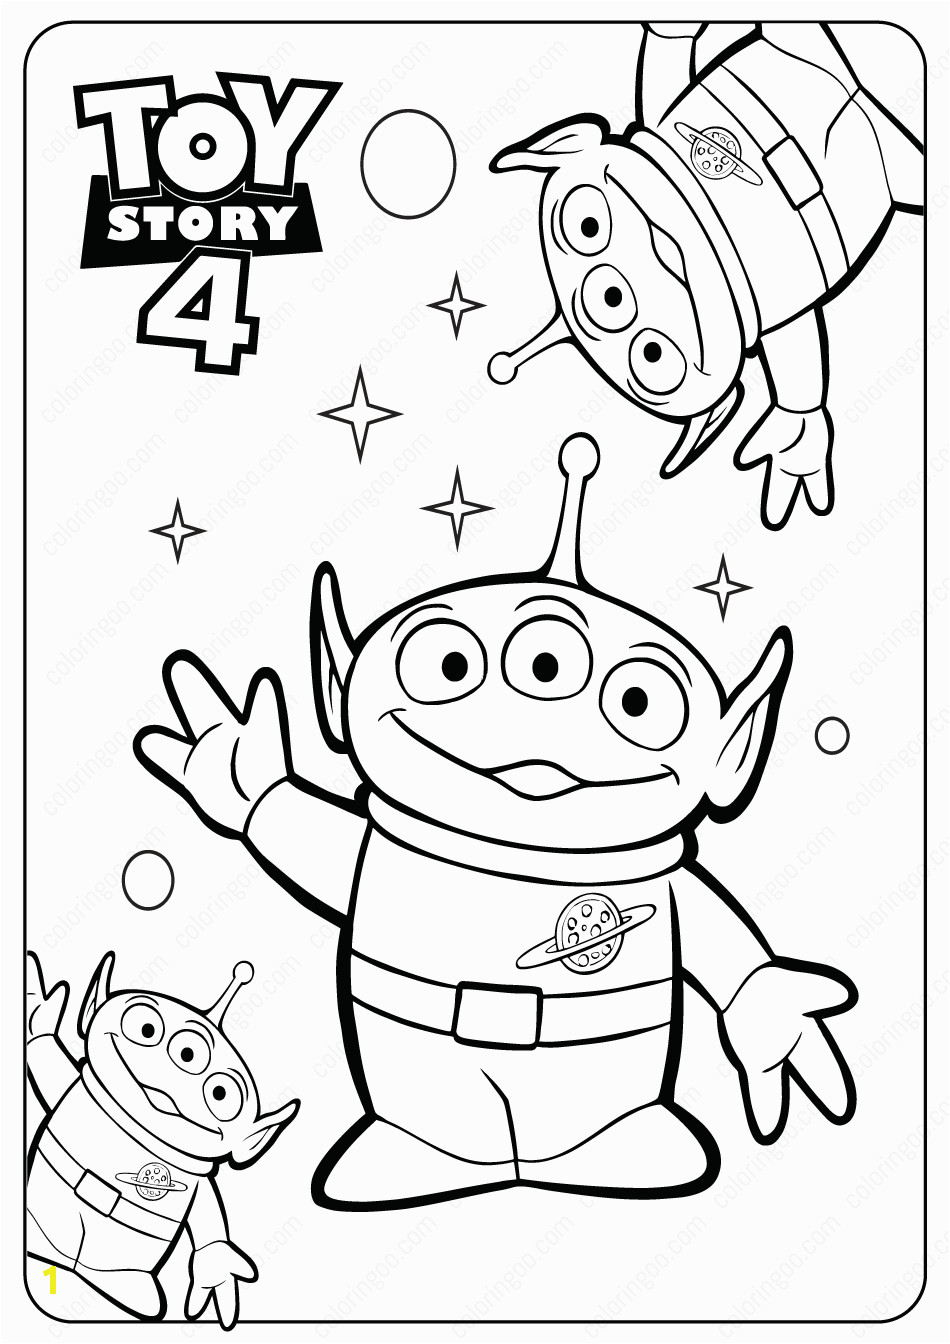 Toy Story Coloring Pages Printable Free Printable toy Story Aliens Pdf Coloring Pages with